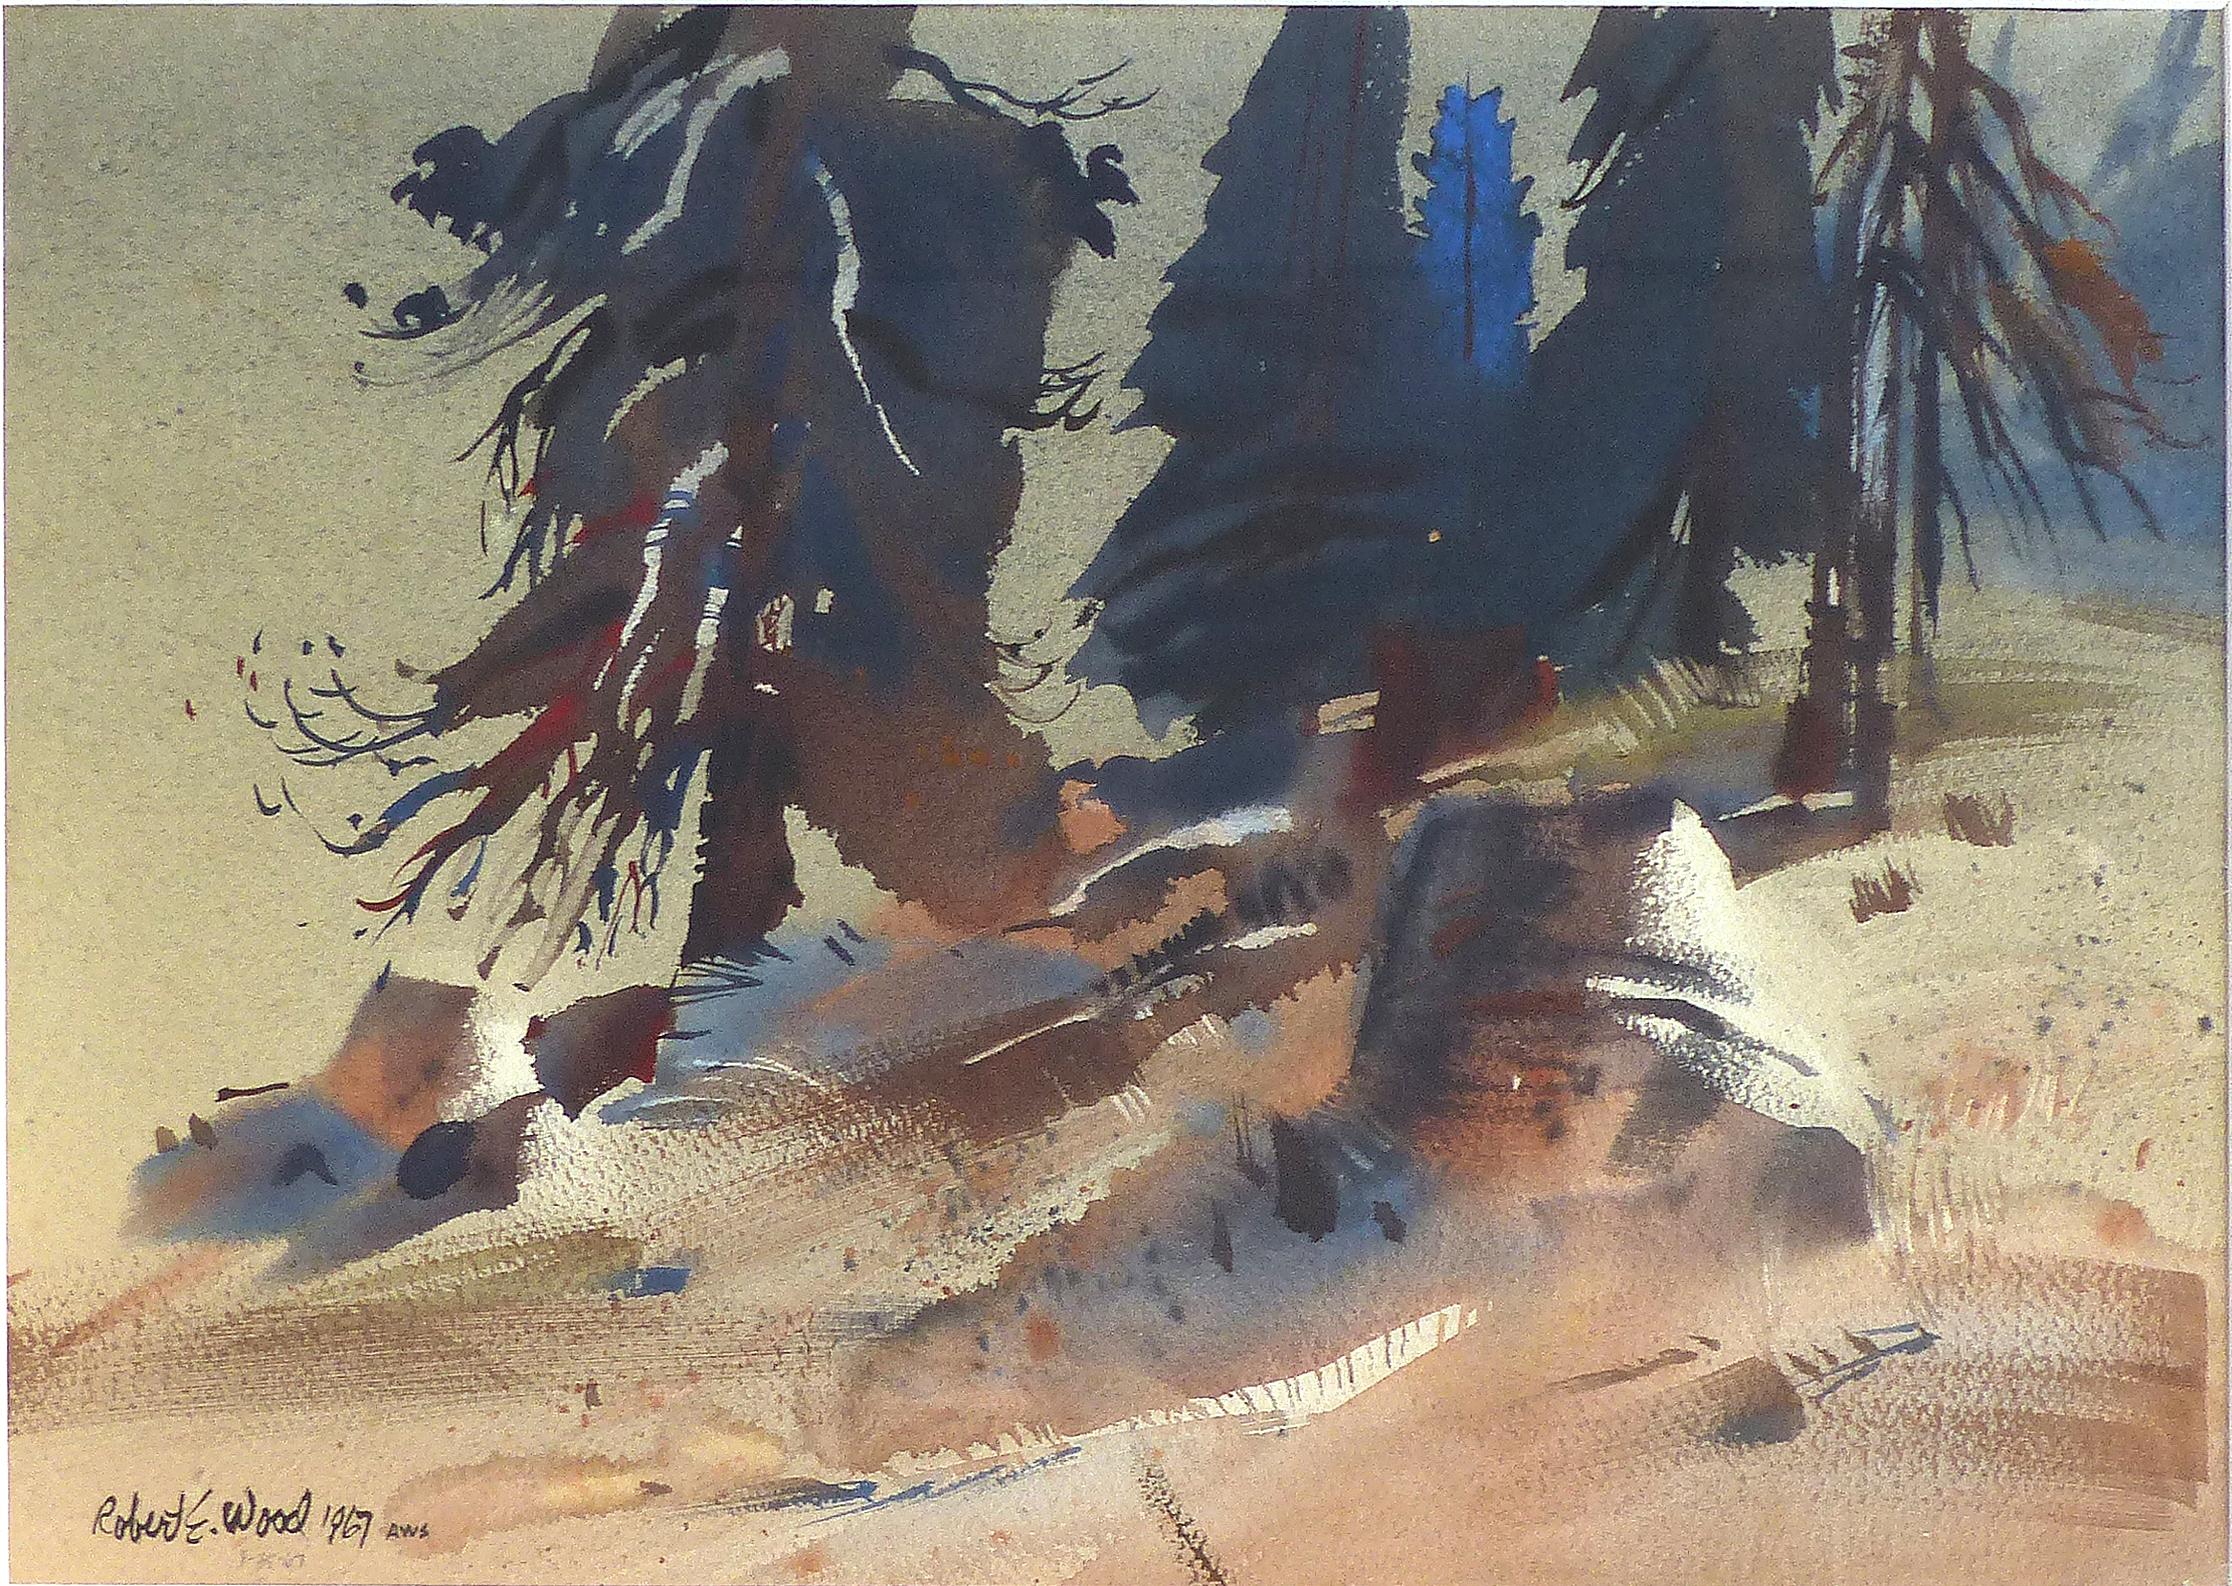 Robert E. Wood 1967 Watercolor, American California Artist 

Offered for sale is an abstract watercolor of a landscape by California artist Robert E, Wood. Signed lower left and dated 1967. Born in Gardena, California, Robert E. Wood is known for